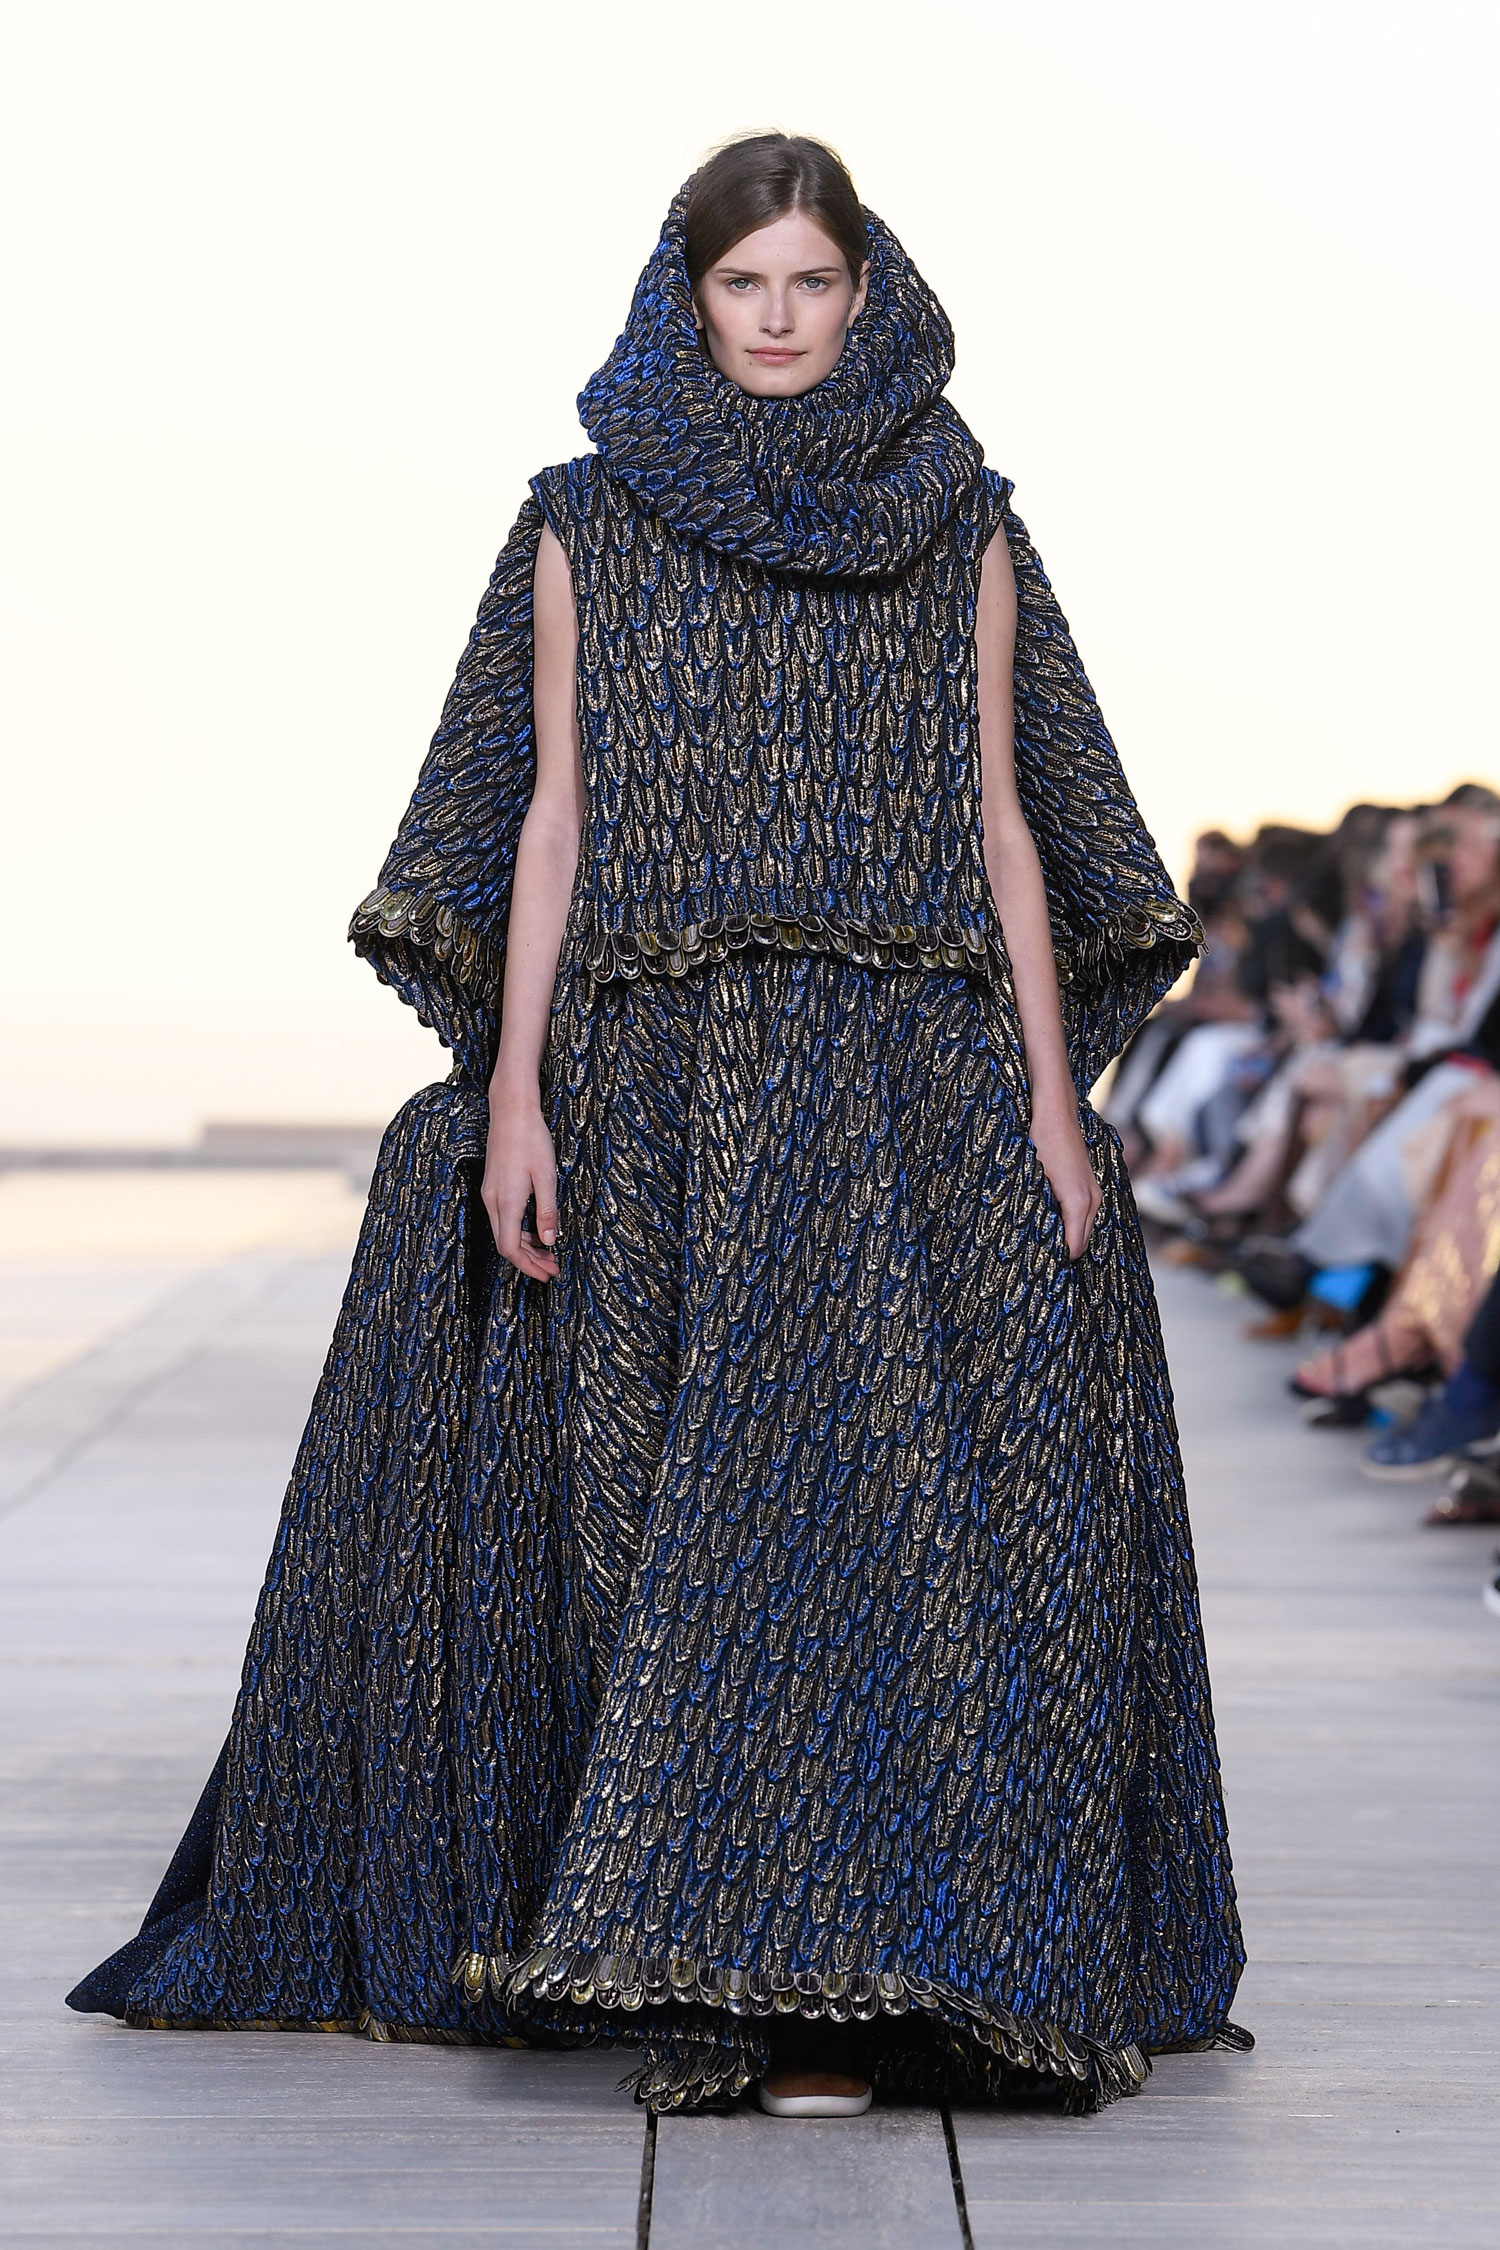 Louis Vuitton Comes to La Jolla for the 2023 Cruise Collection Runway Show